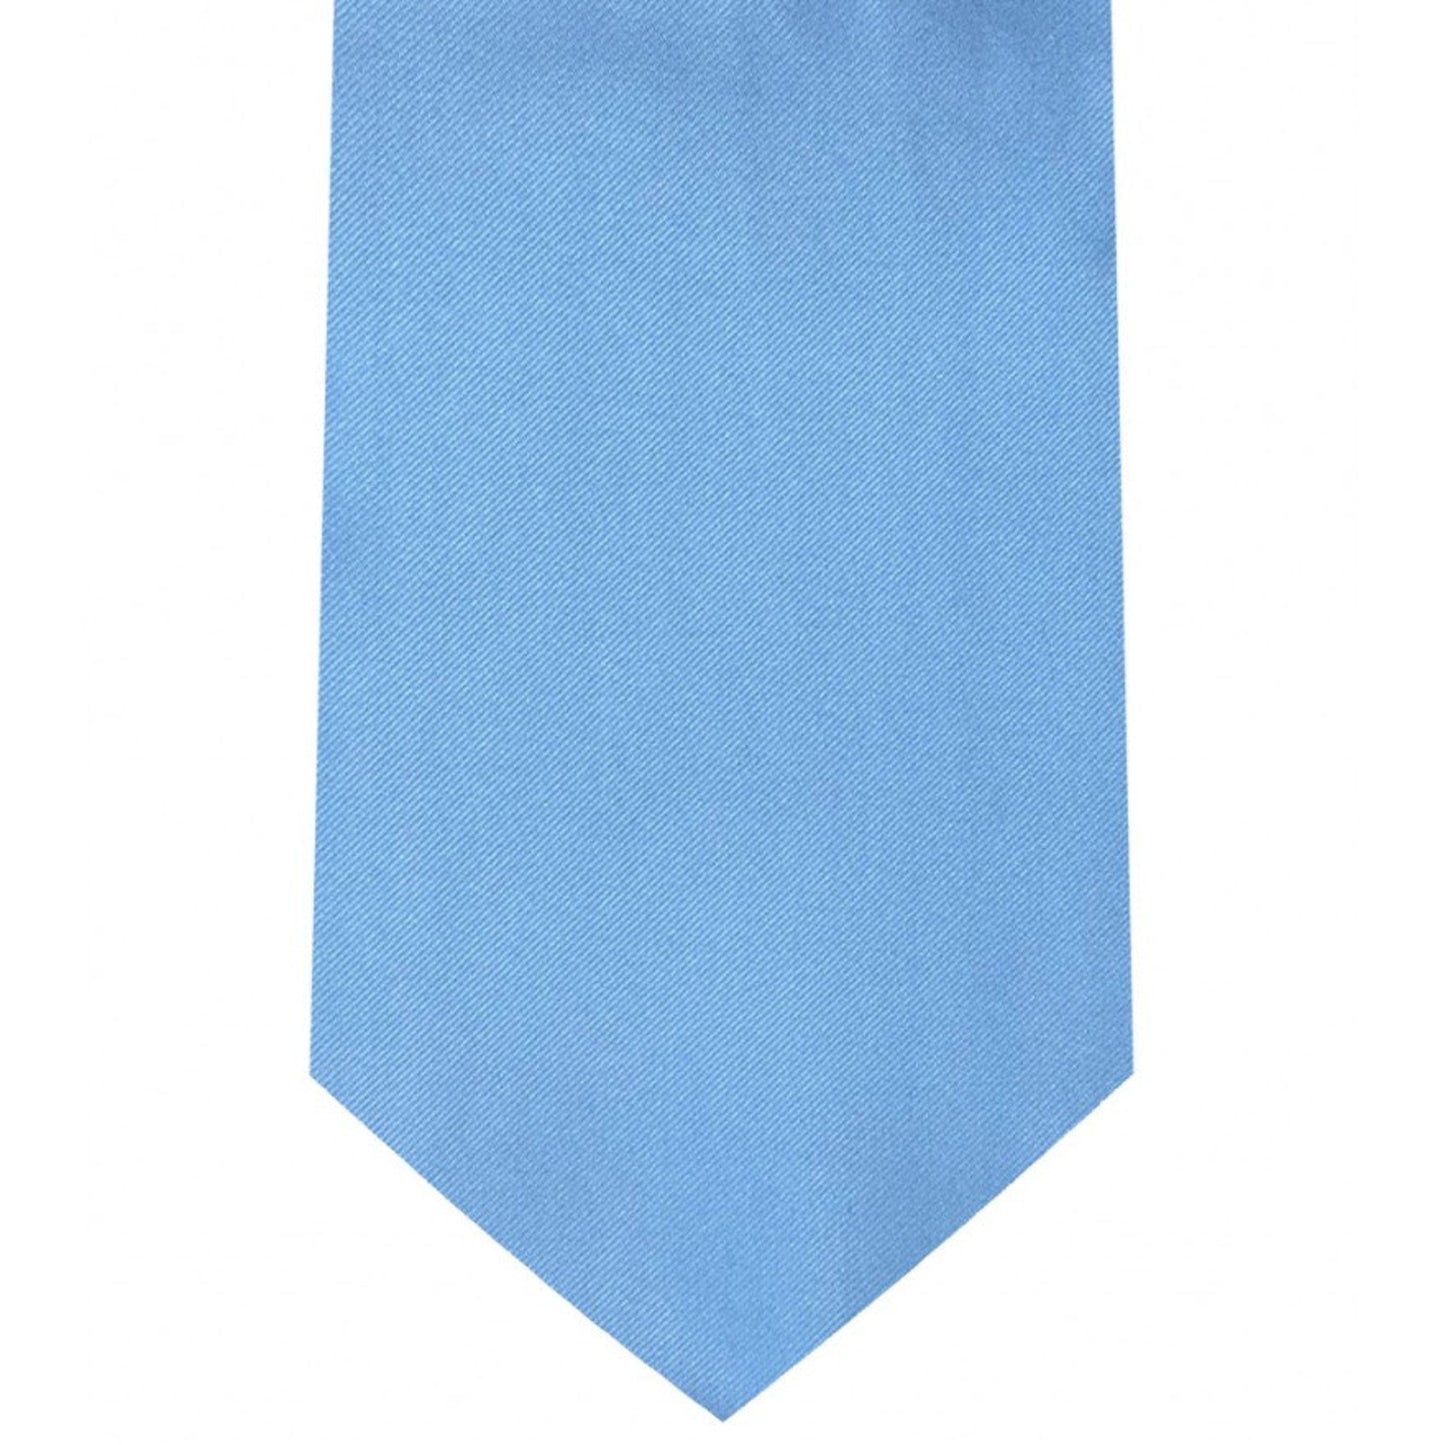 Classic Baby Blue Tie Regular width 3.5 inches With Matching Pocket Square | KCT Menswear 